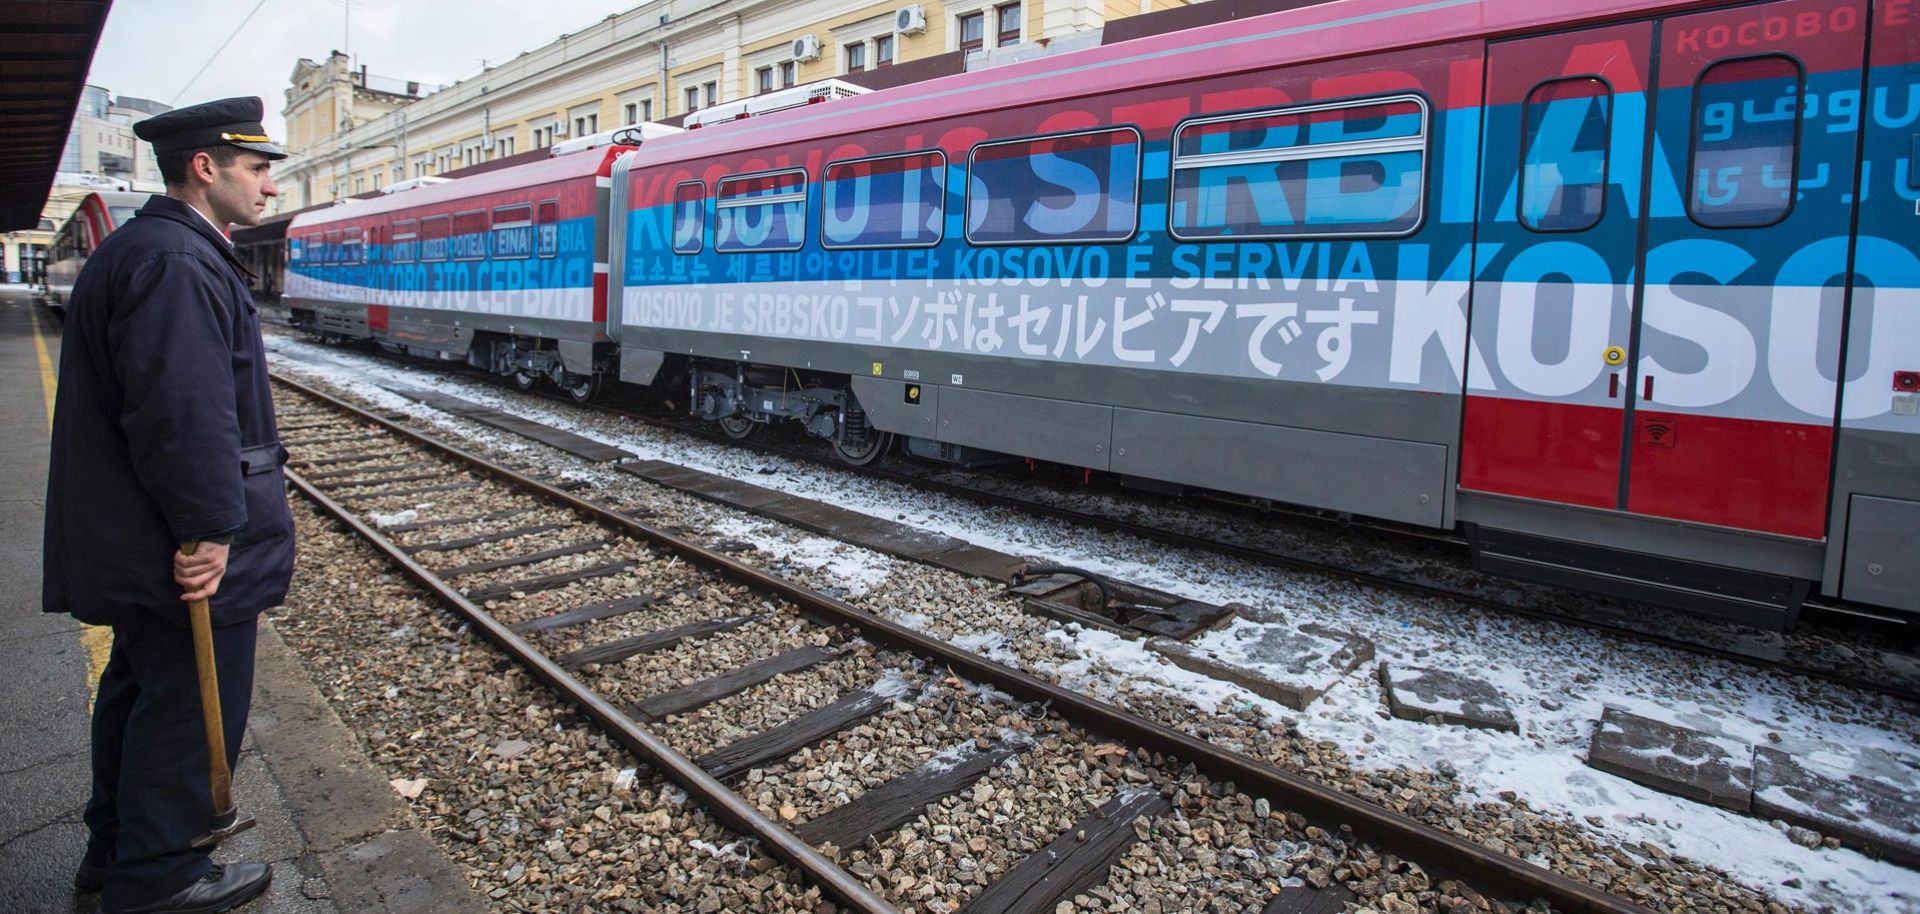 In January, conflict almost erupted in the Balkans after the Kosovar government dispatched special police forces to stop a Serbian train headed into Kosovo's majority-Serb northern territory, emblazoned with the slogan "Kosovo is Serbia" in 21 languages.